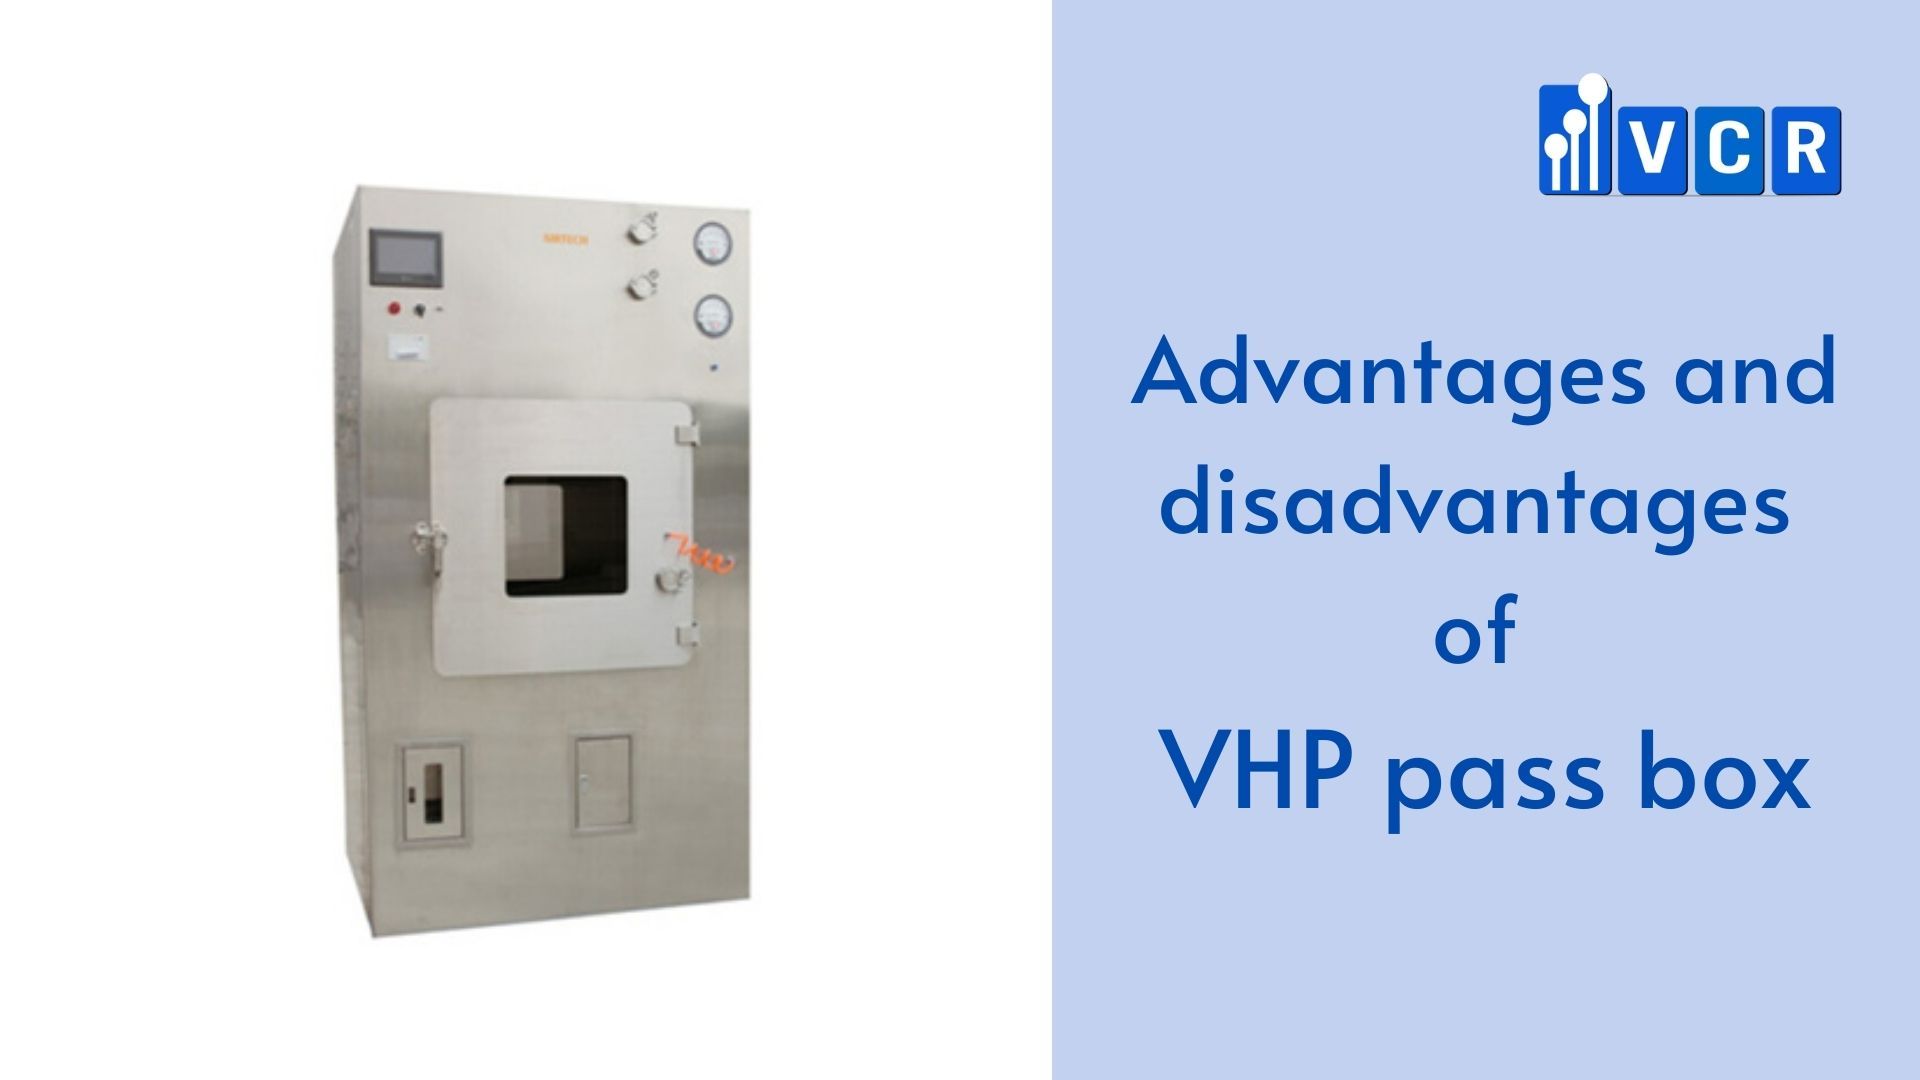 Advantages and disadvantages of VHP pass box